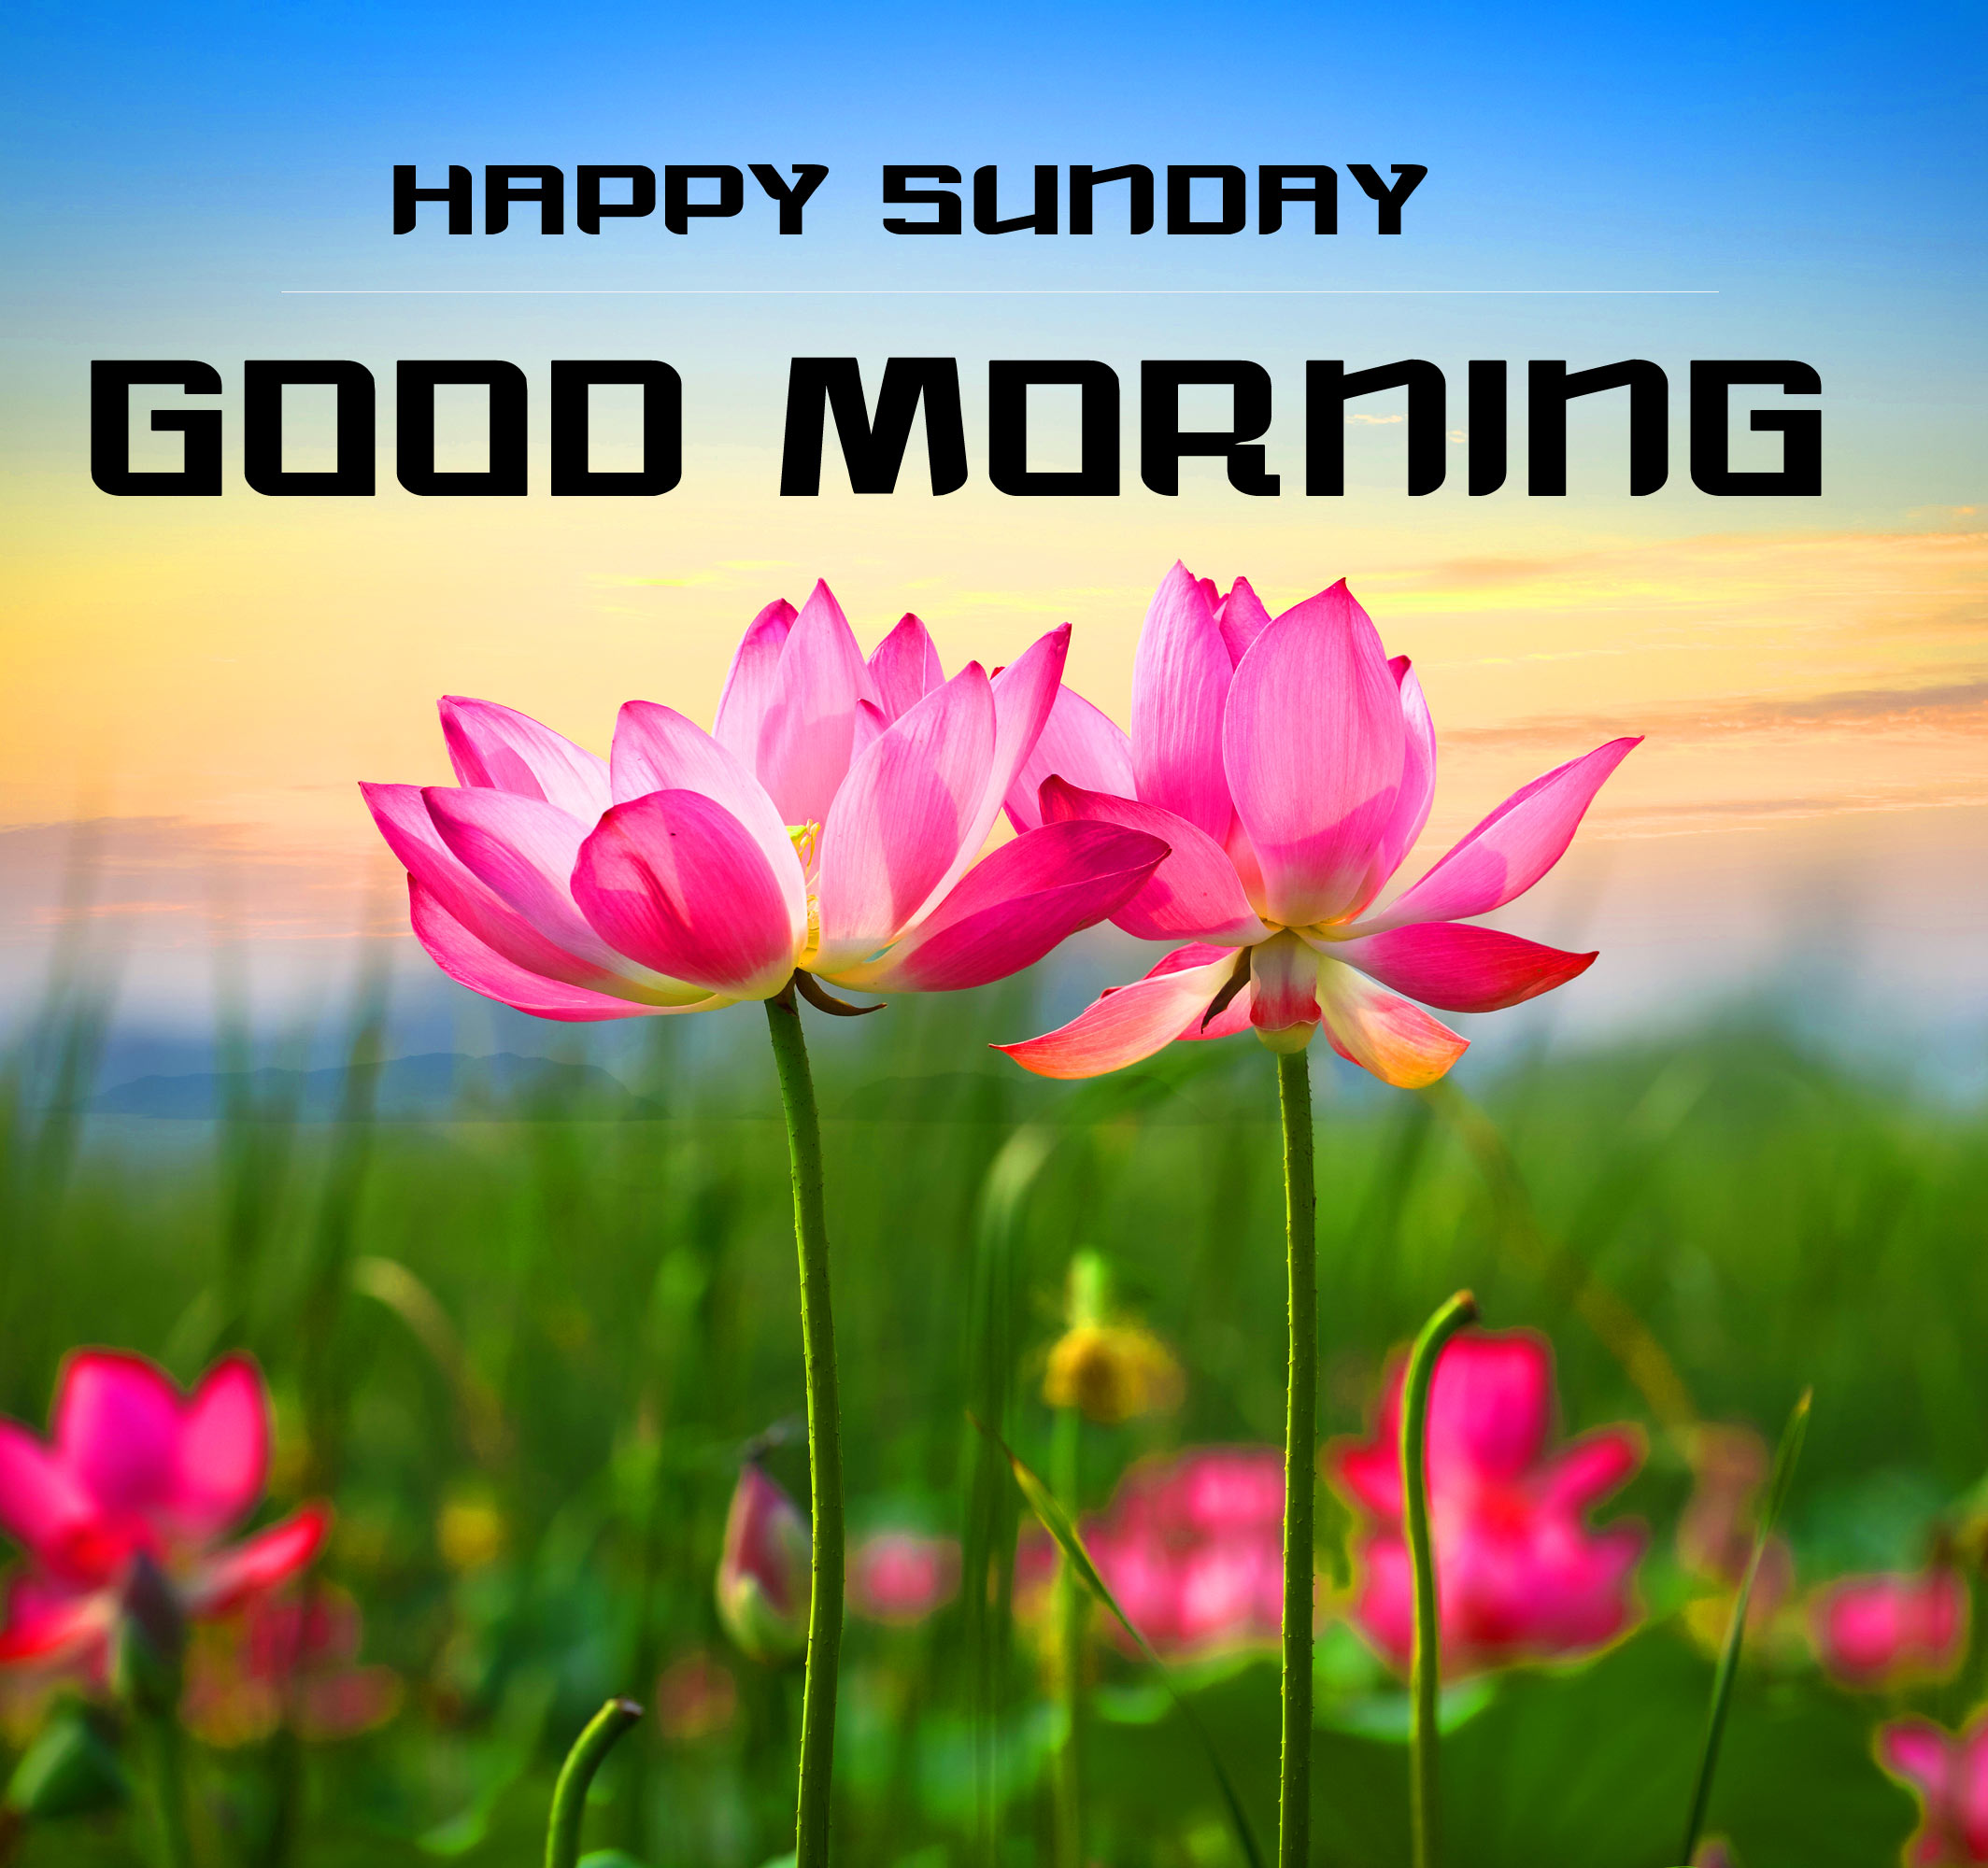 Sunday Good Morning Wishes Images Free for Facebook